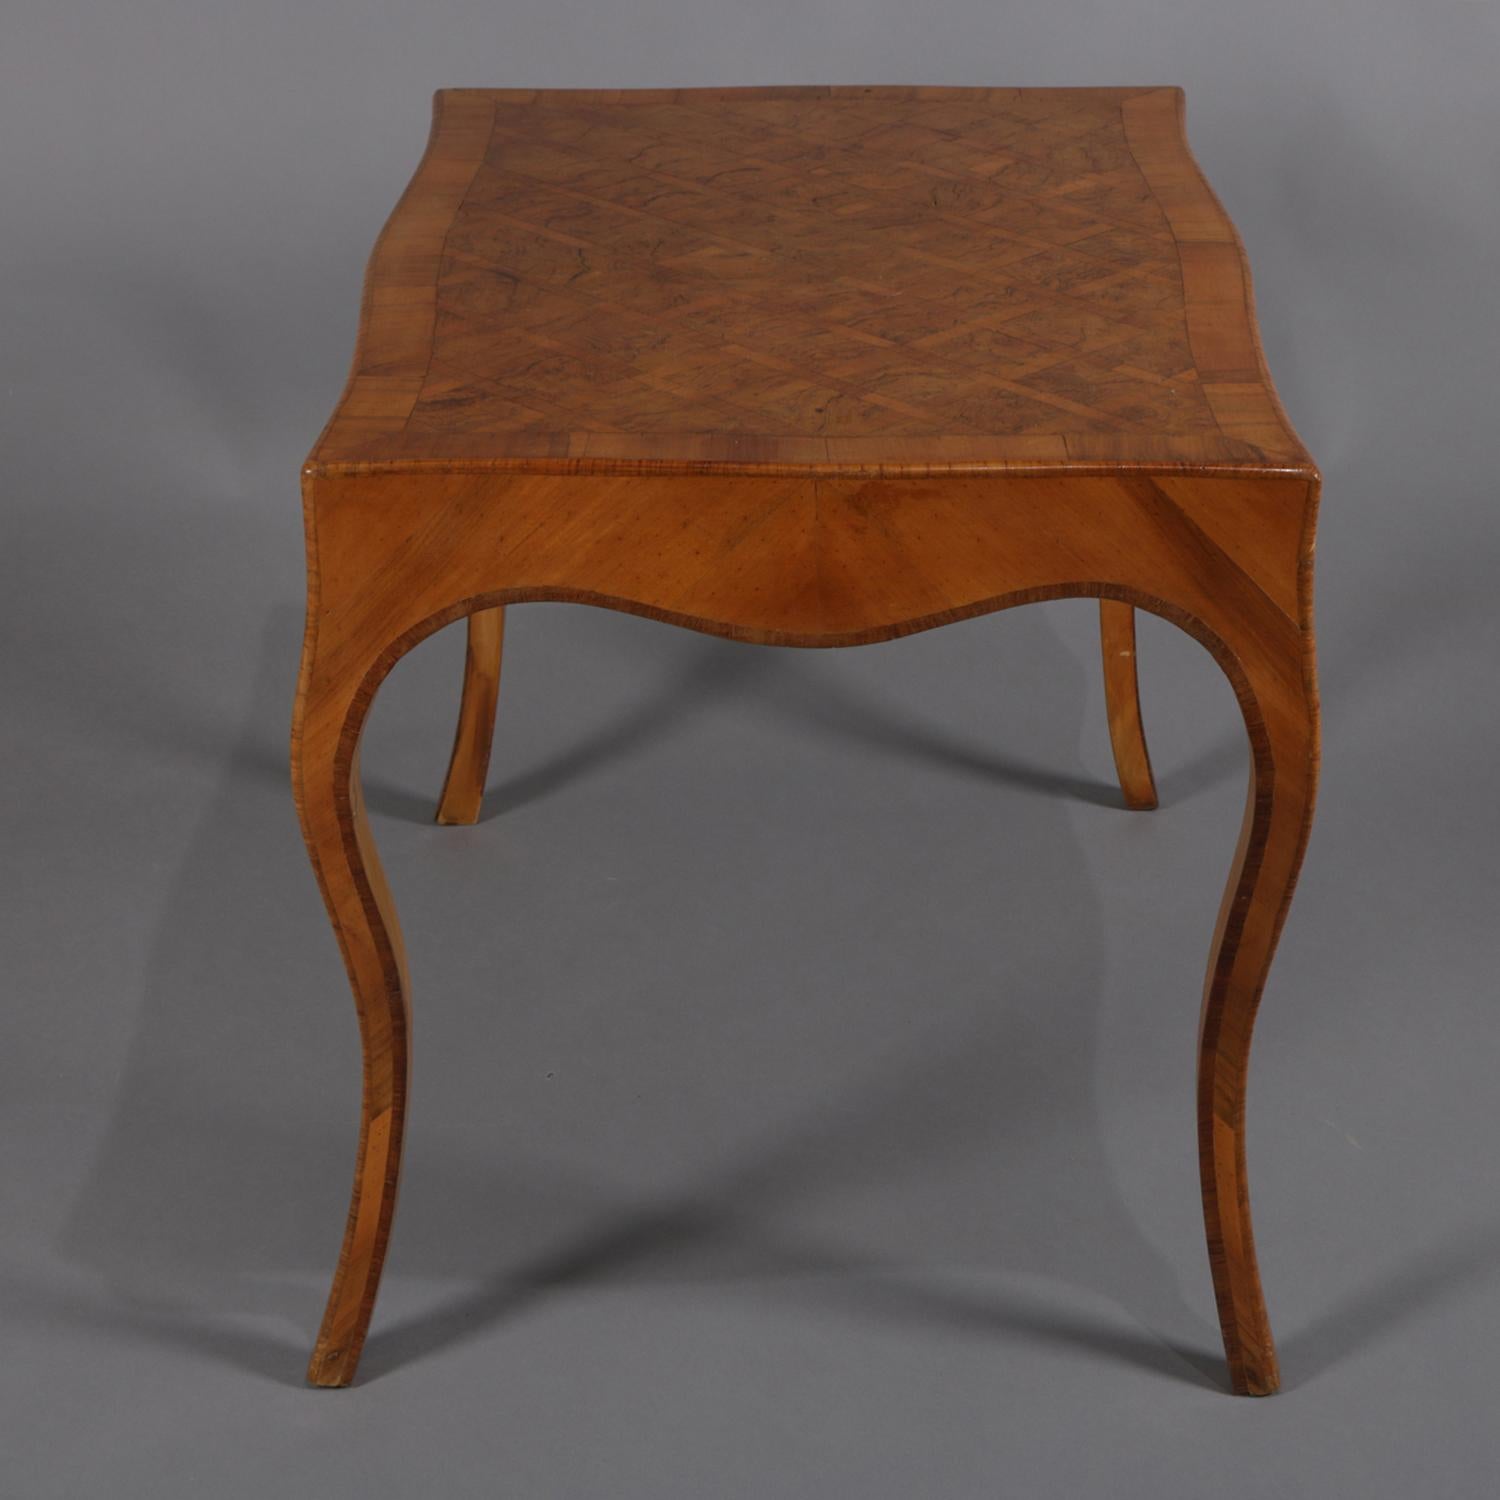 Antique Italian Parquetry Inlaid Mahogany Low Centre Cocktail Table 19th Century 1